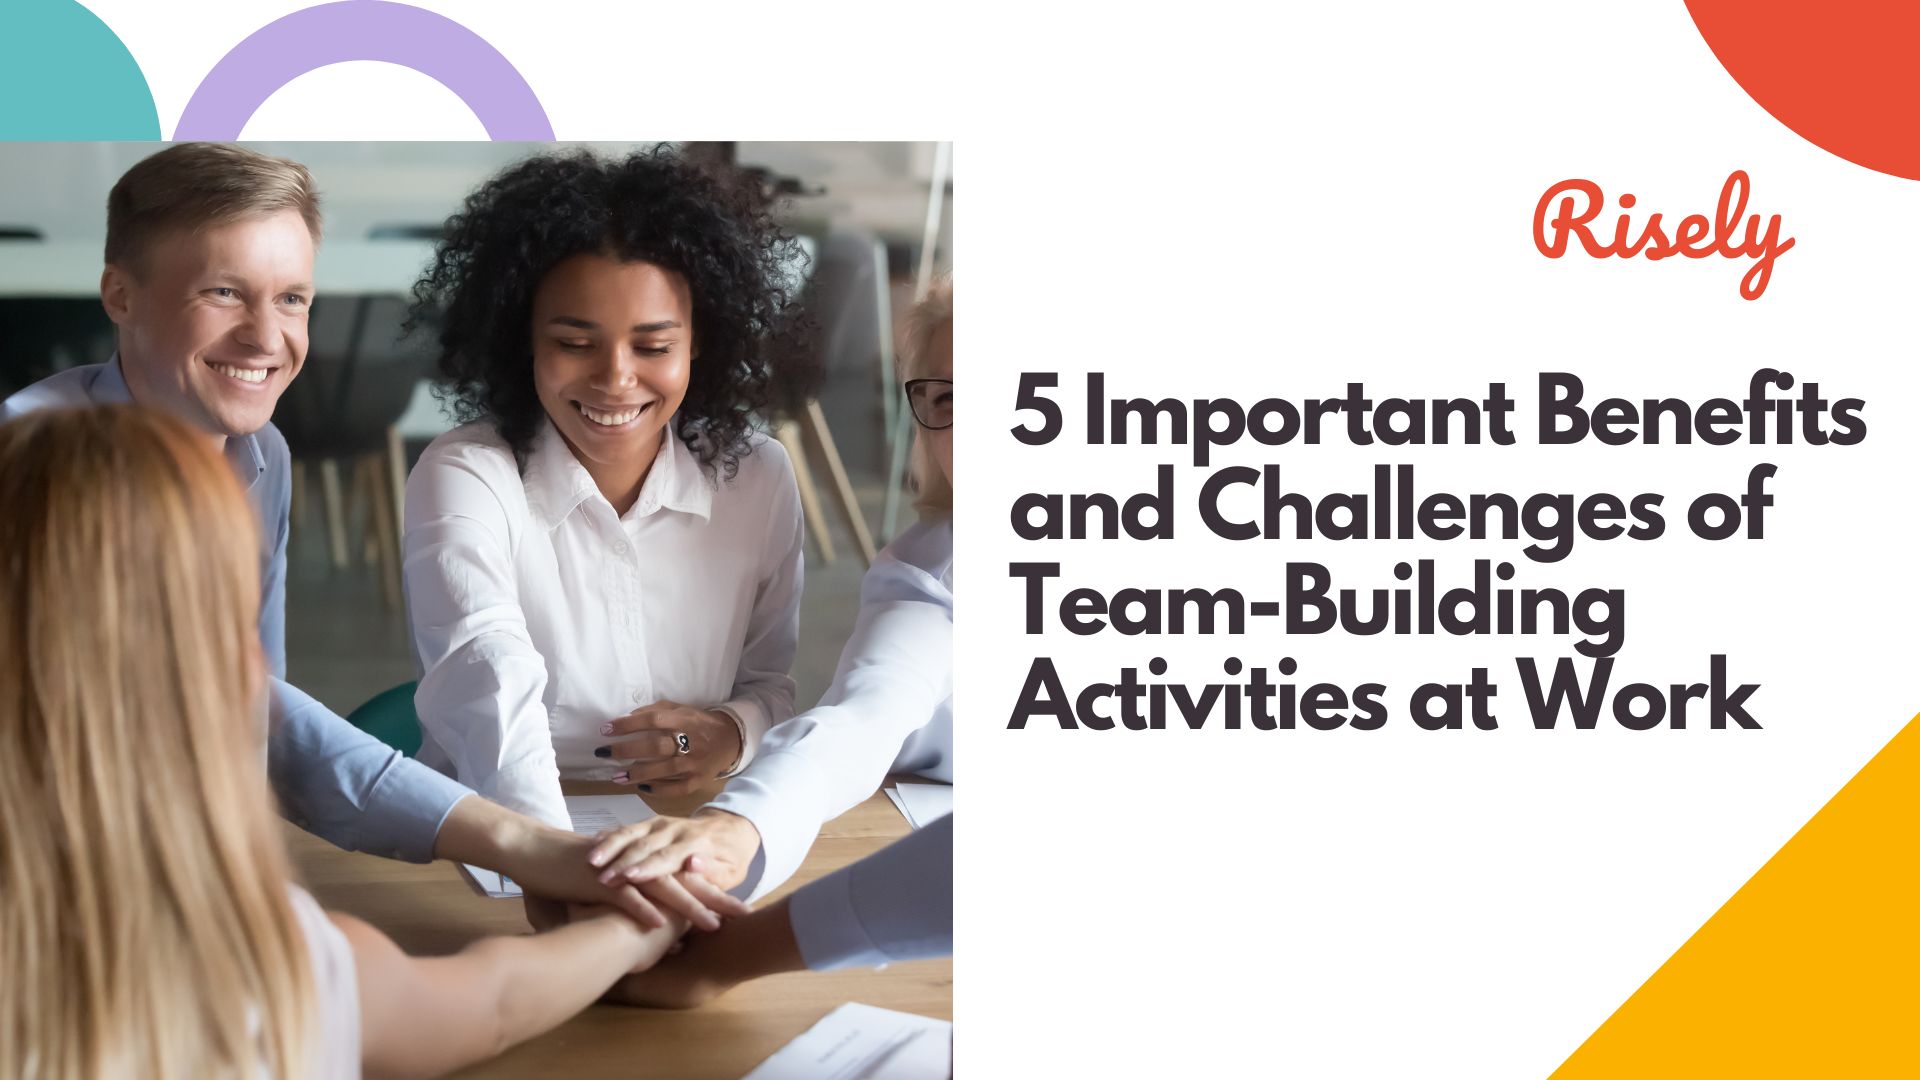 5 Important Benefits and Challenges of Team-Building Activities at Work